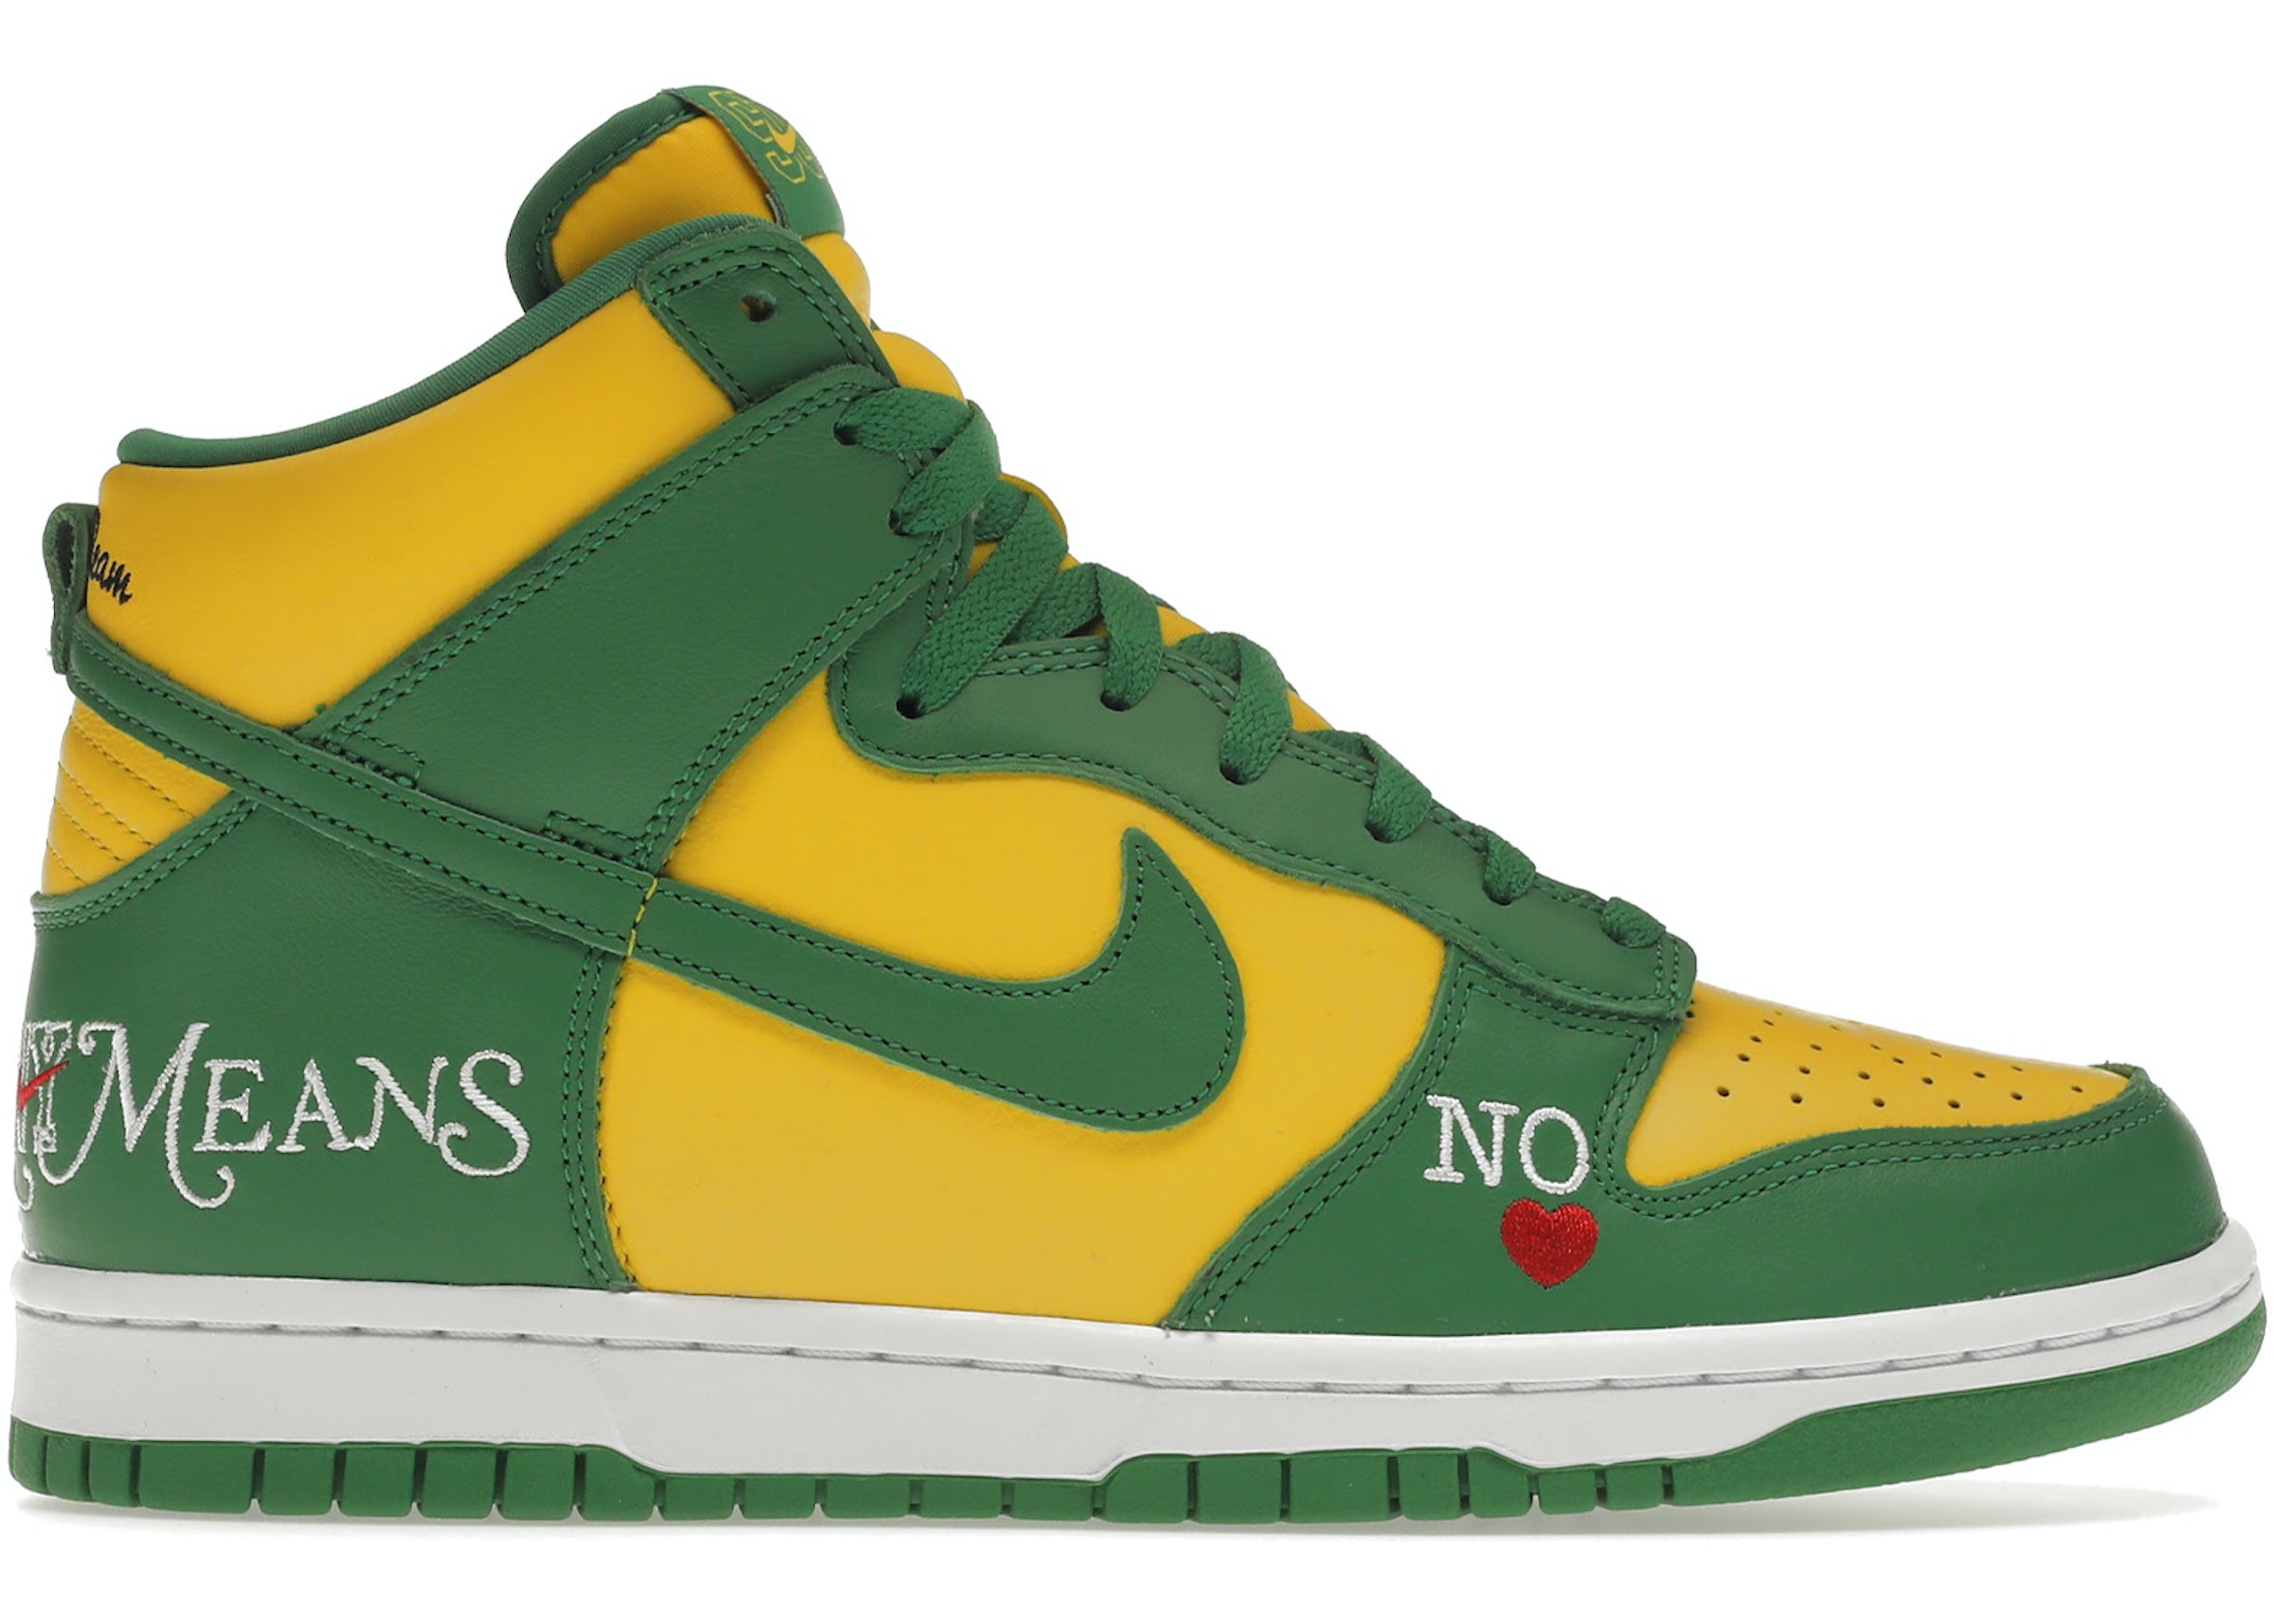 Nike Sb Dunk High Supreme By Any Means Brazil Men'S - Dn3741-700 - Us